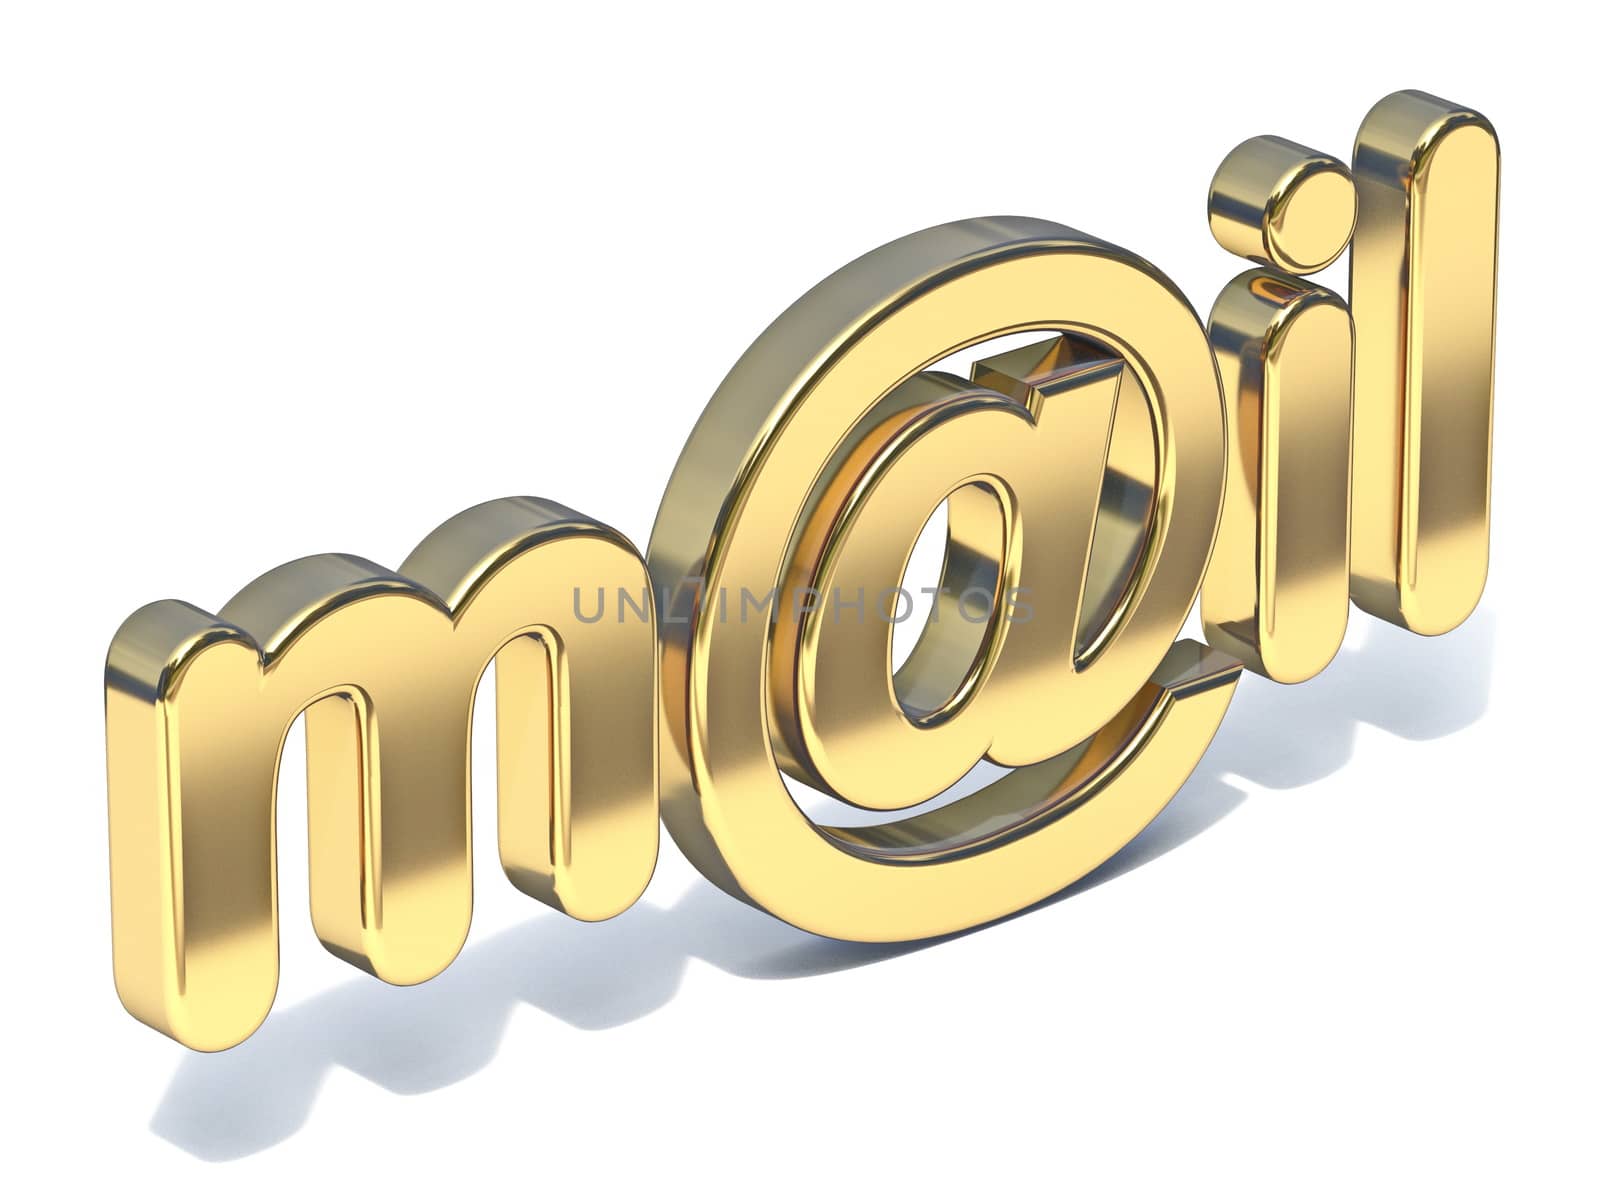 Golden word MAIL with at sign 3D rendering illustration isolated on white background